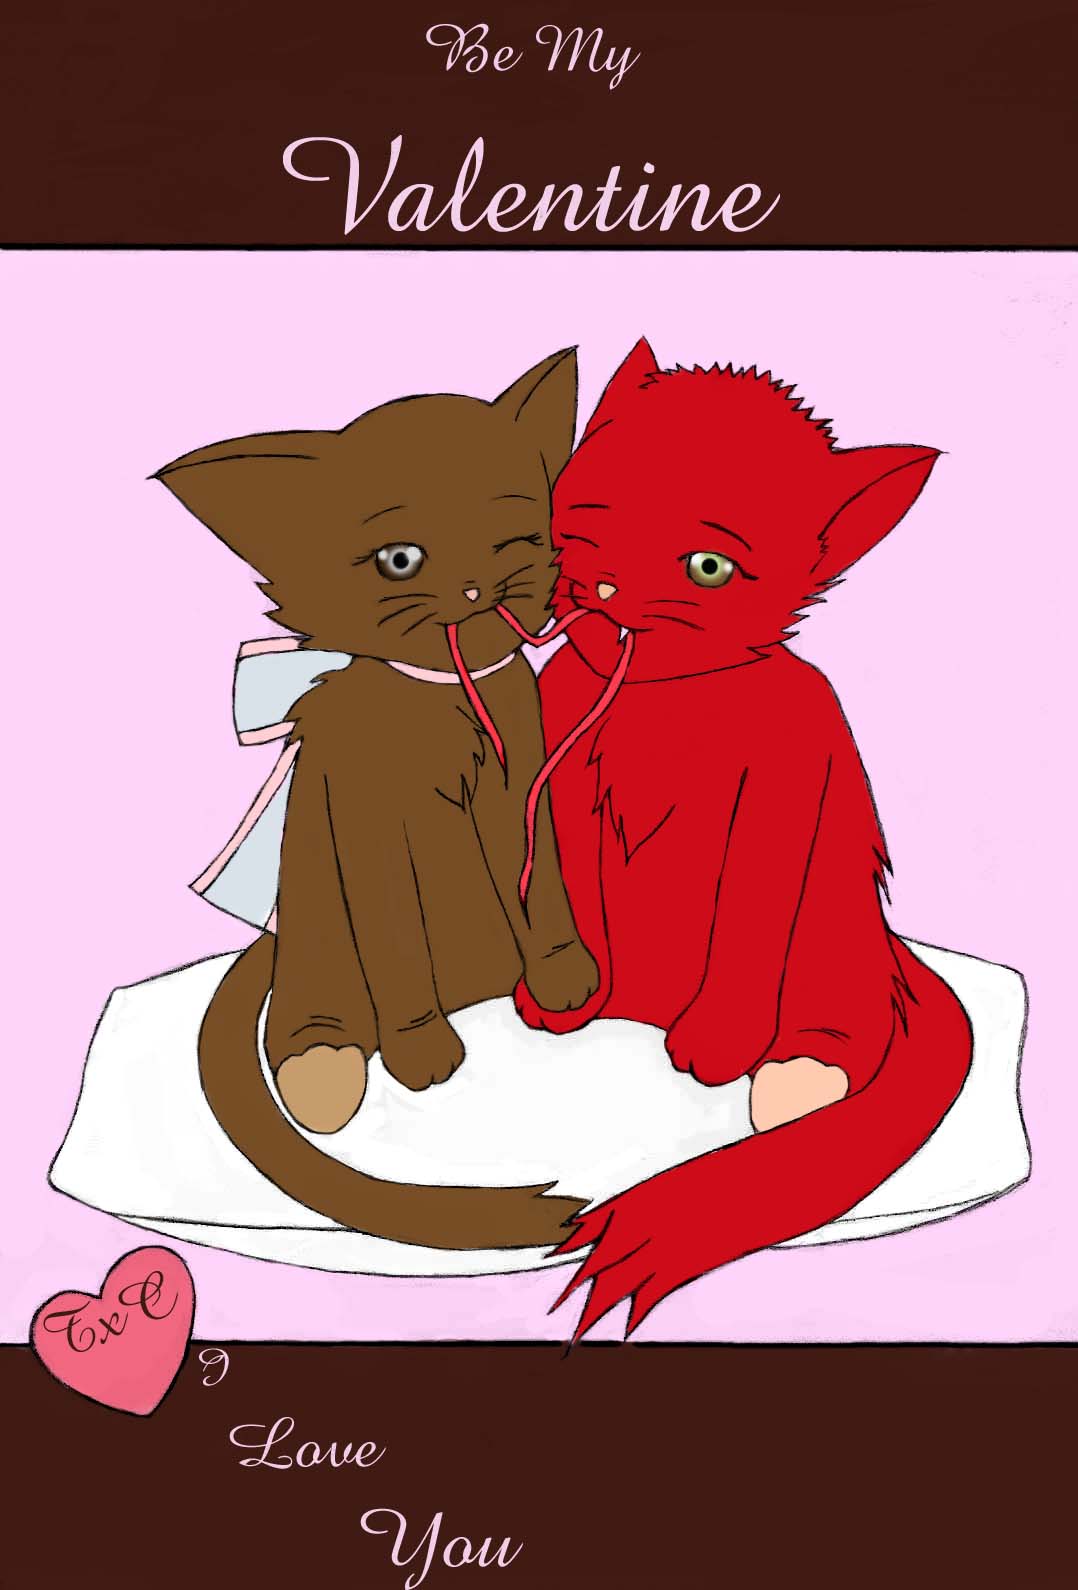 My Valentine's Card Colored by Angel_girl_808